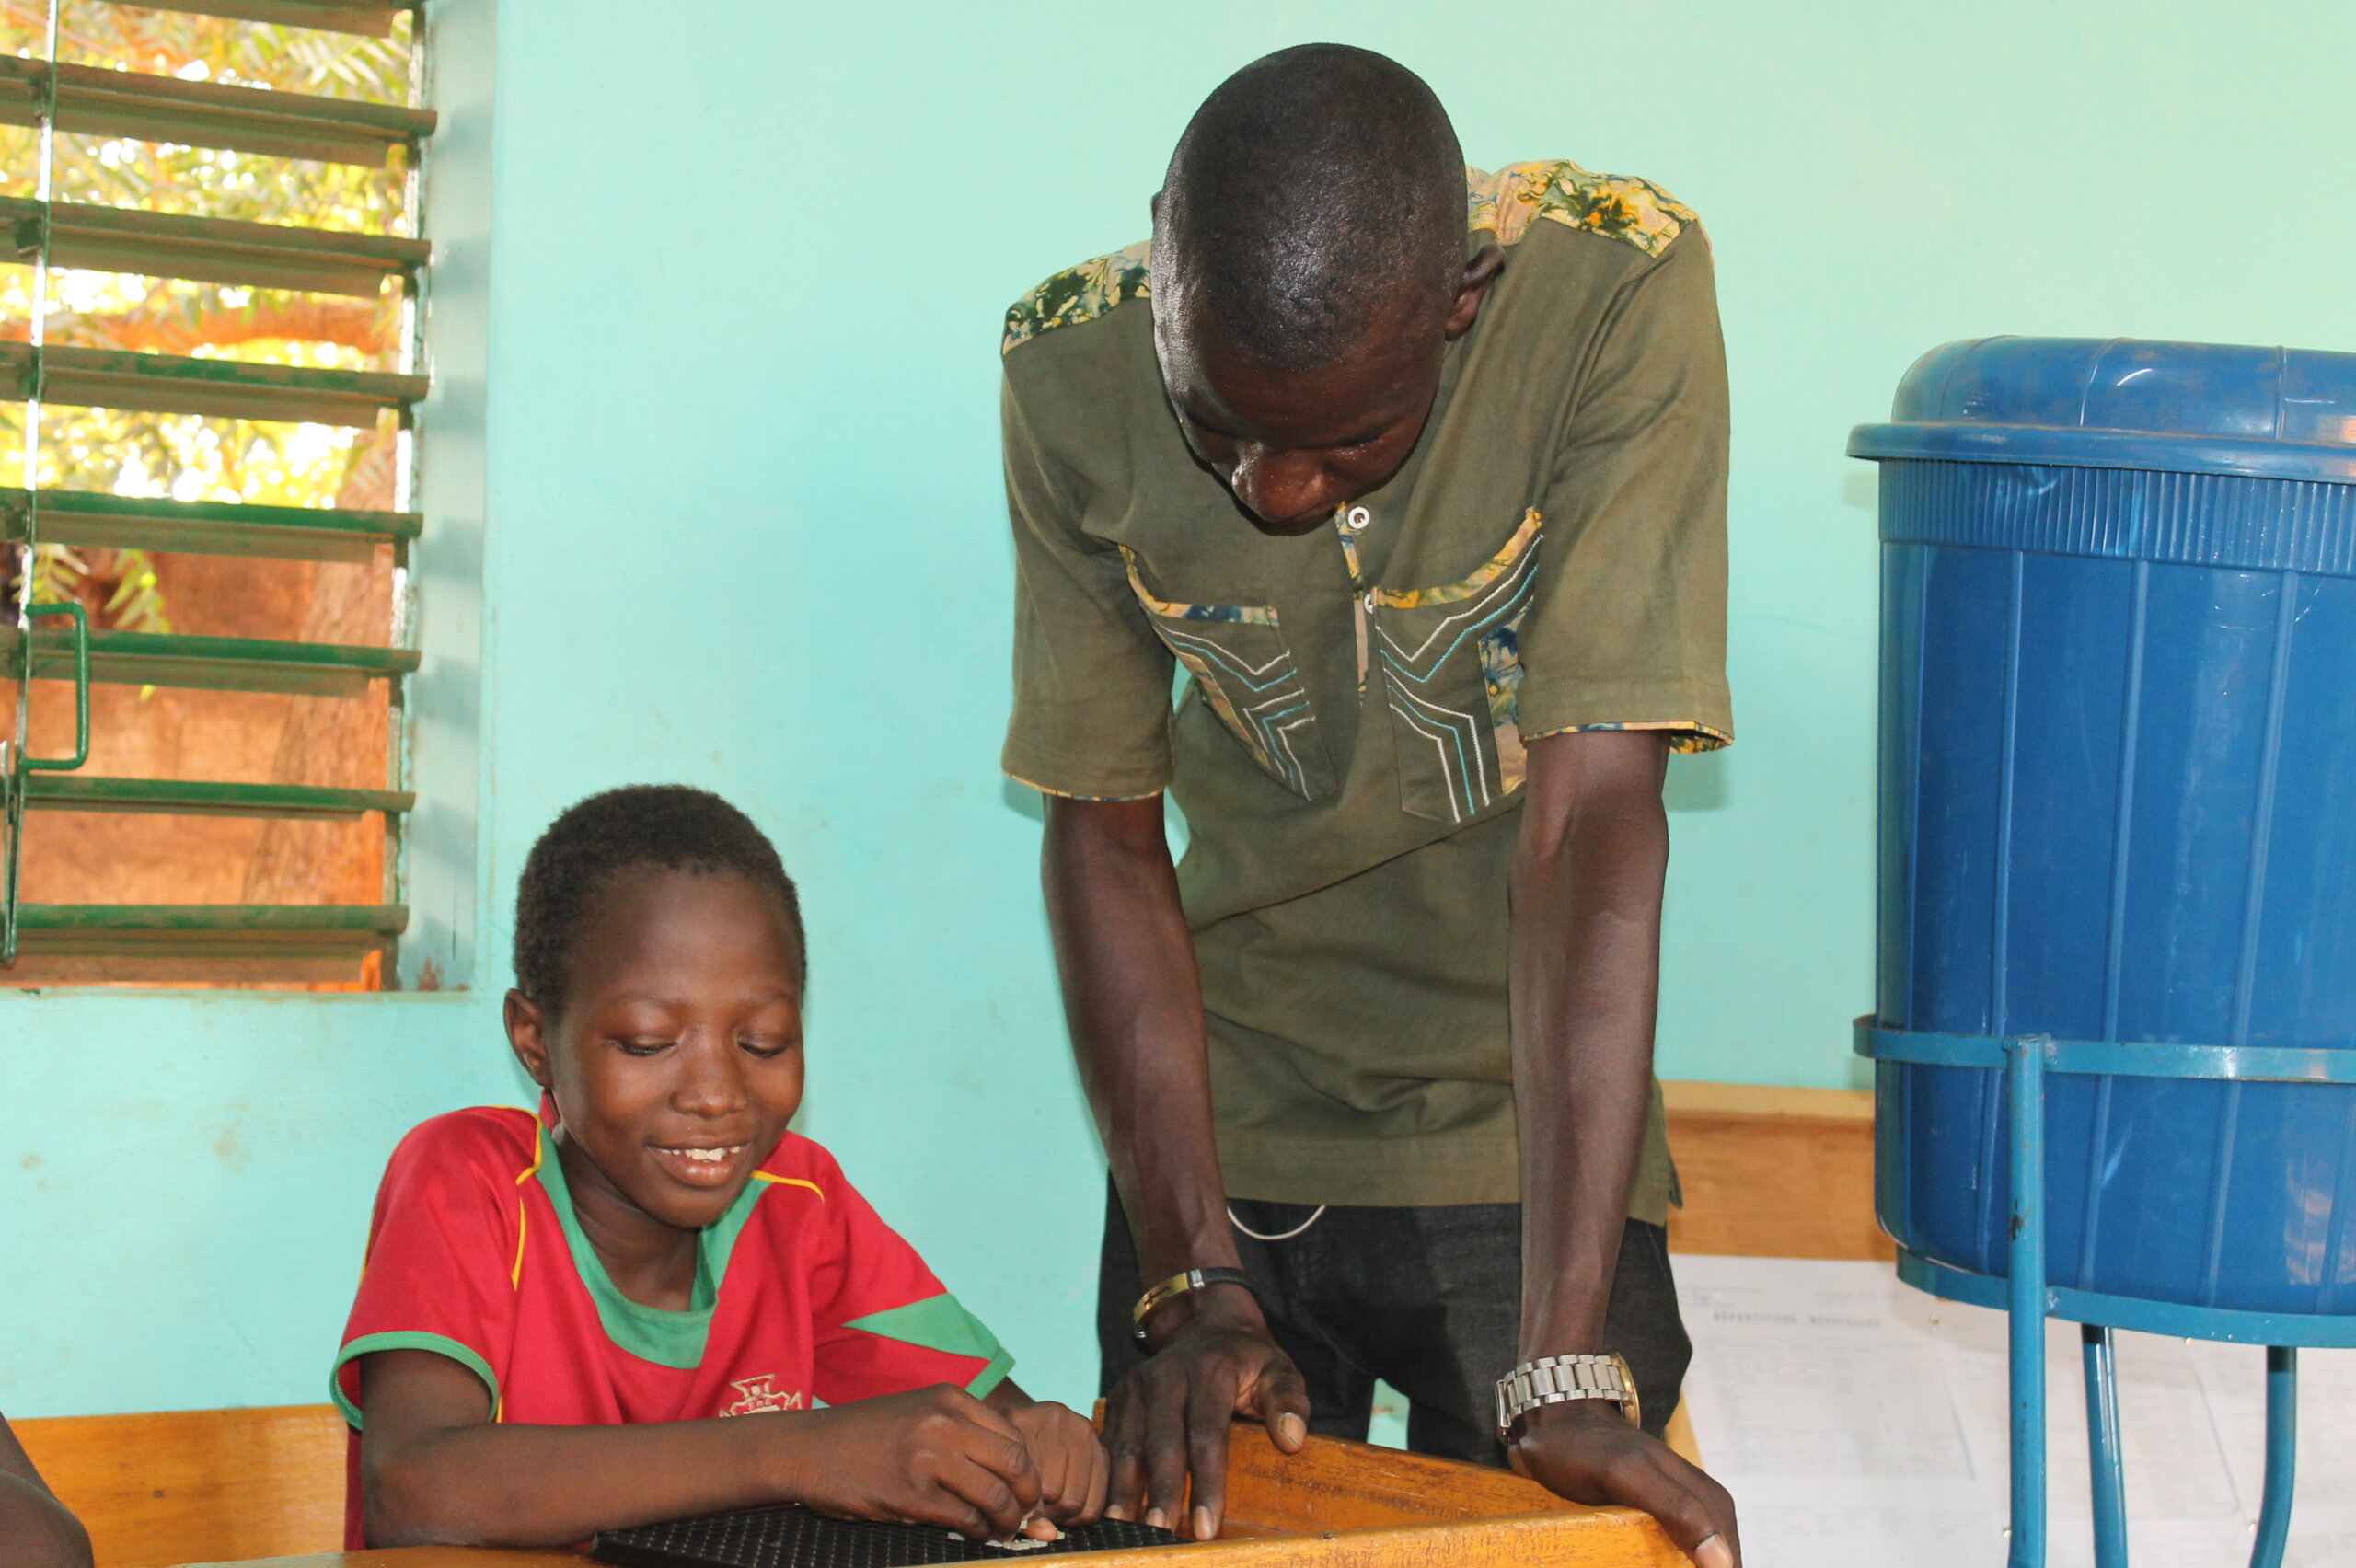 A school girls is sitting at a desk, wearing a red shirt, after she received glaucoma treatment. Her teacher stands next to her, wearing a dark green t-shirt. 